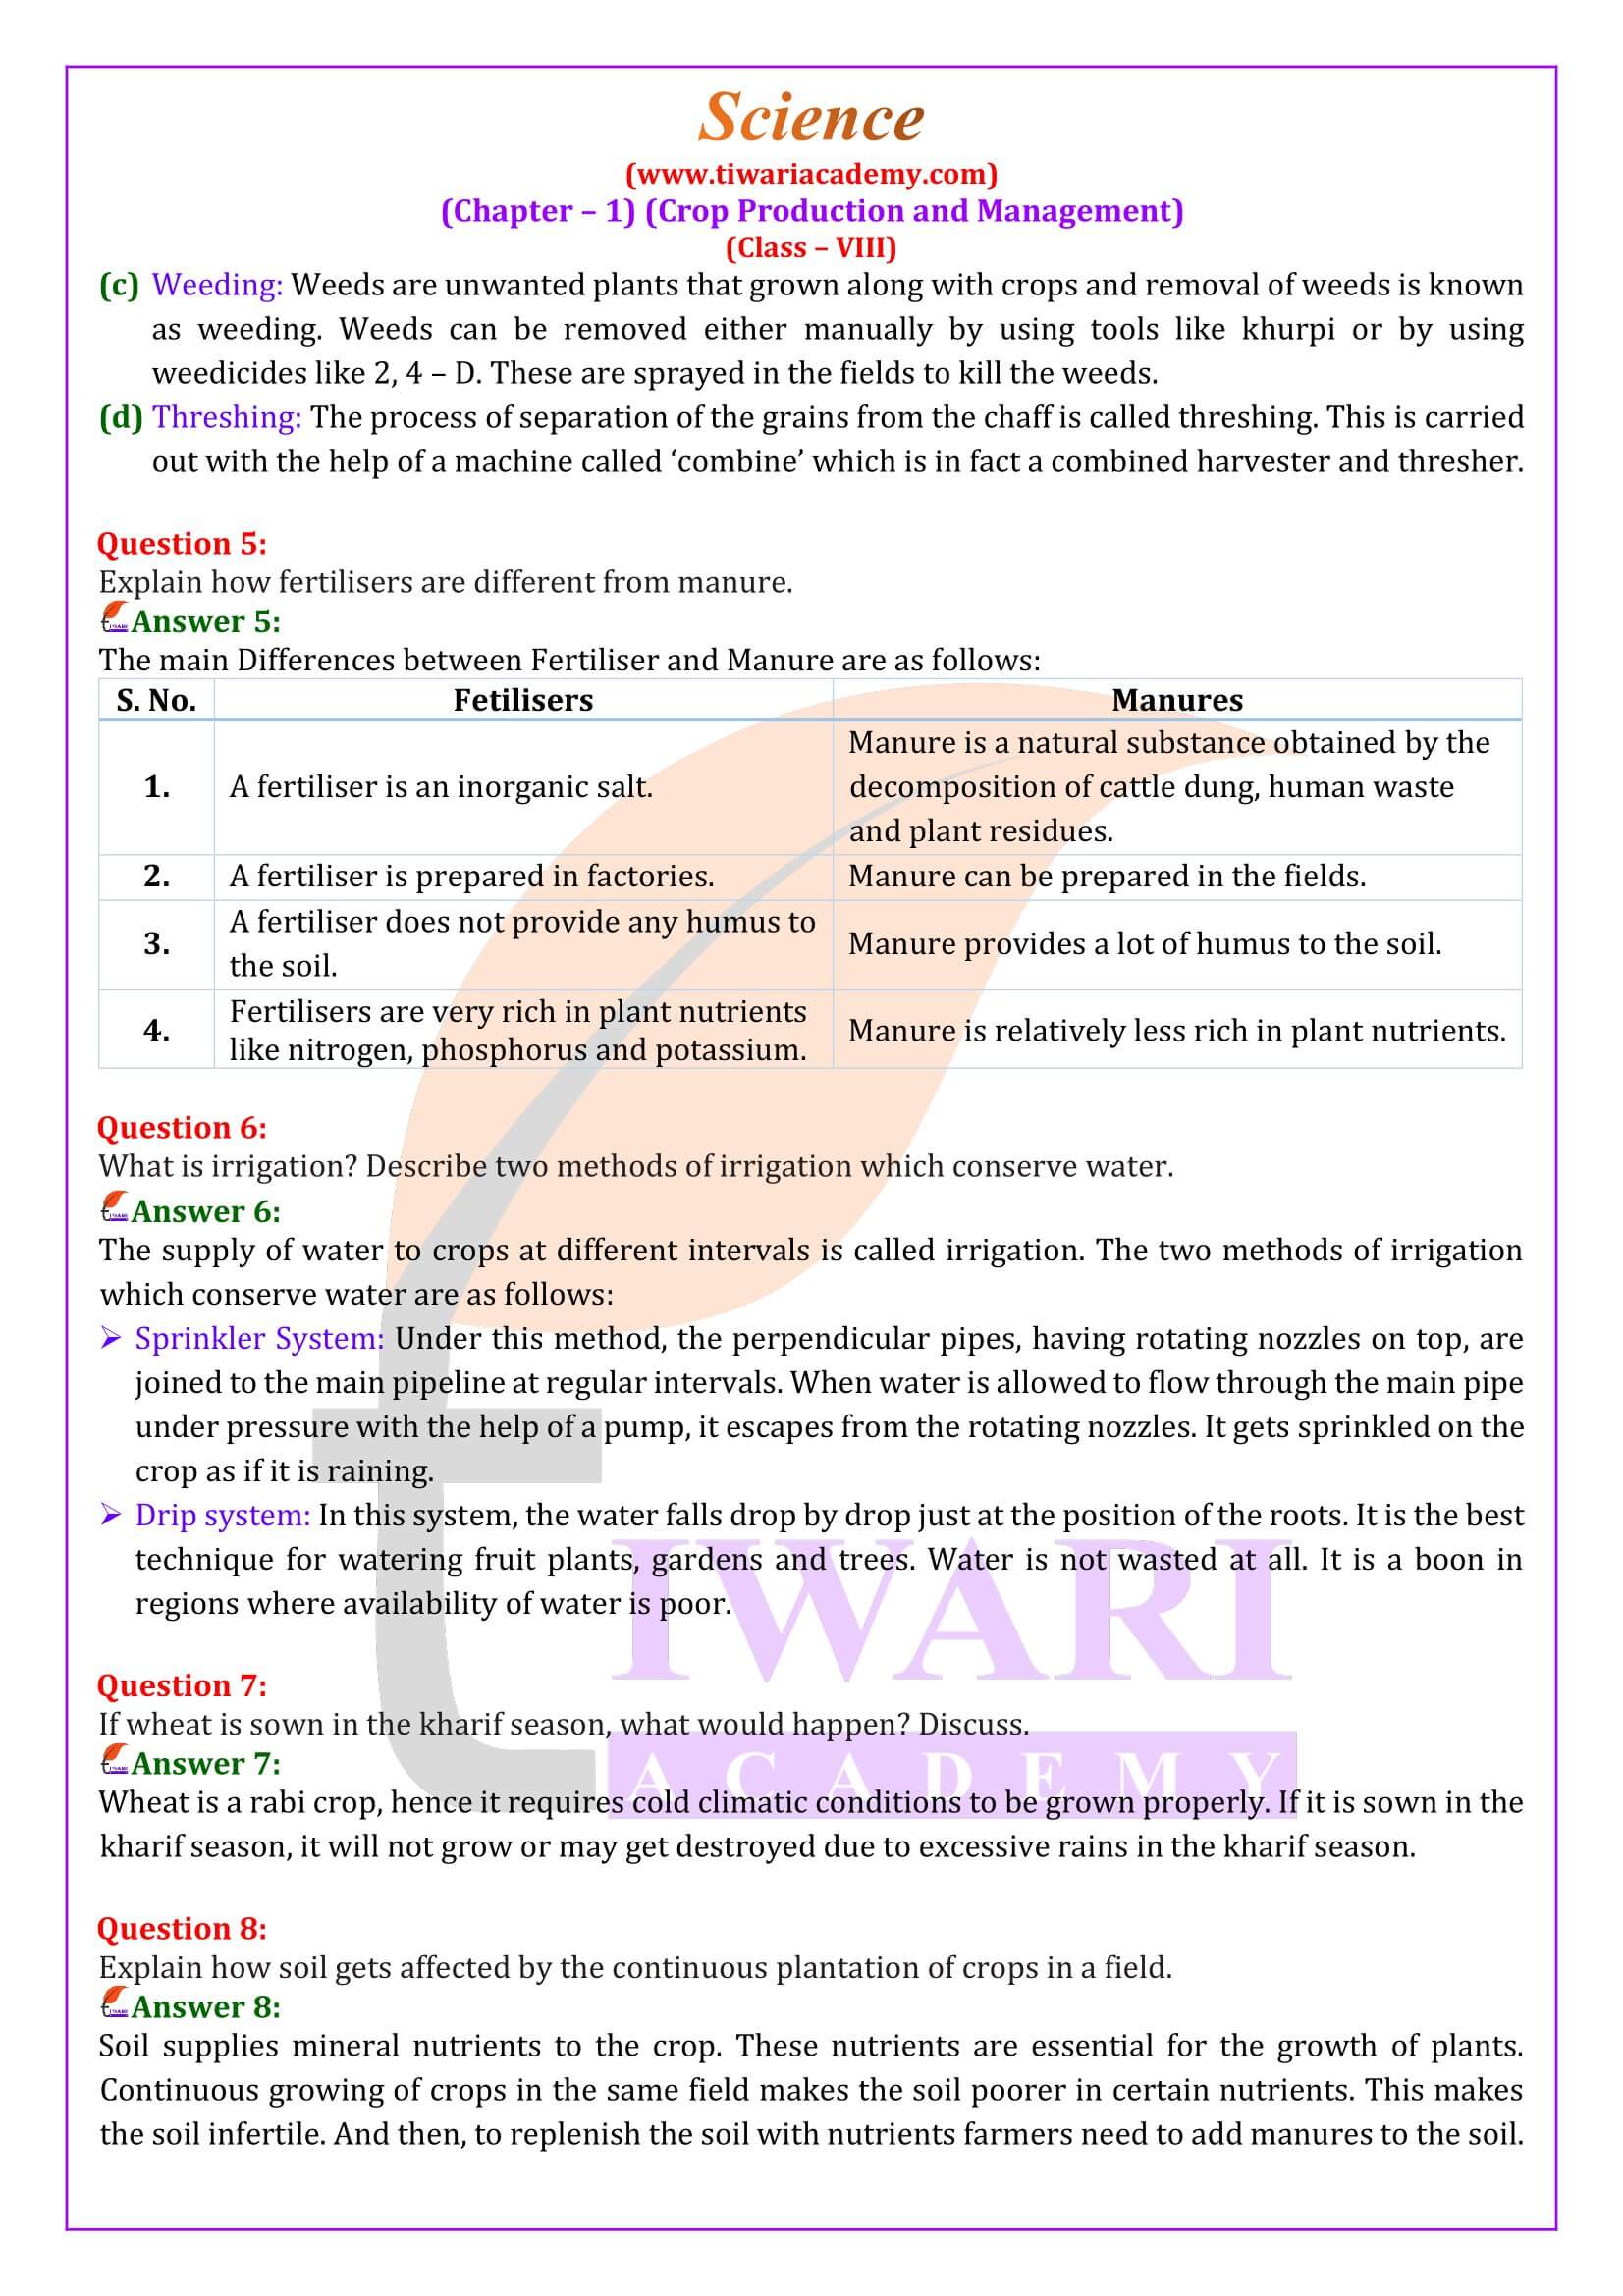 NCERT Solutions for Class 8 Science Chapter 1 Question Answers